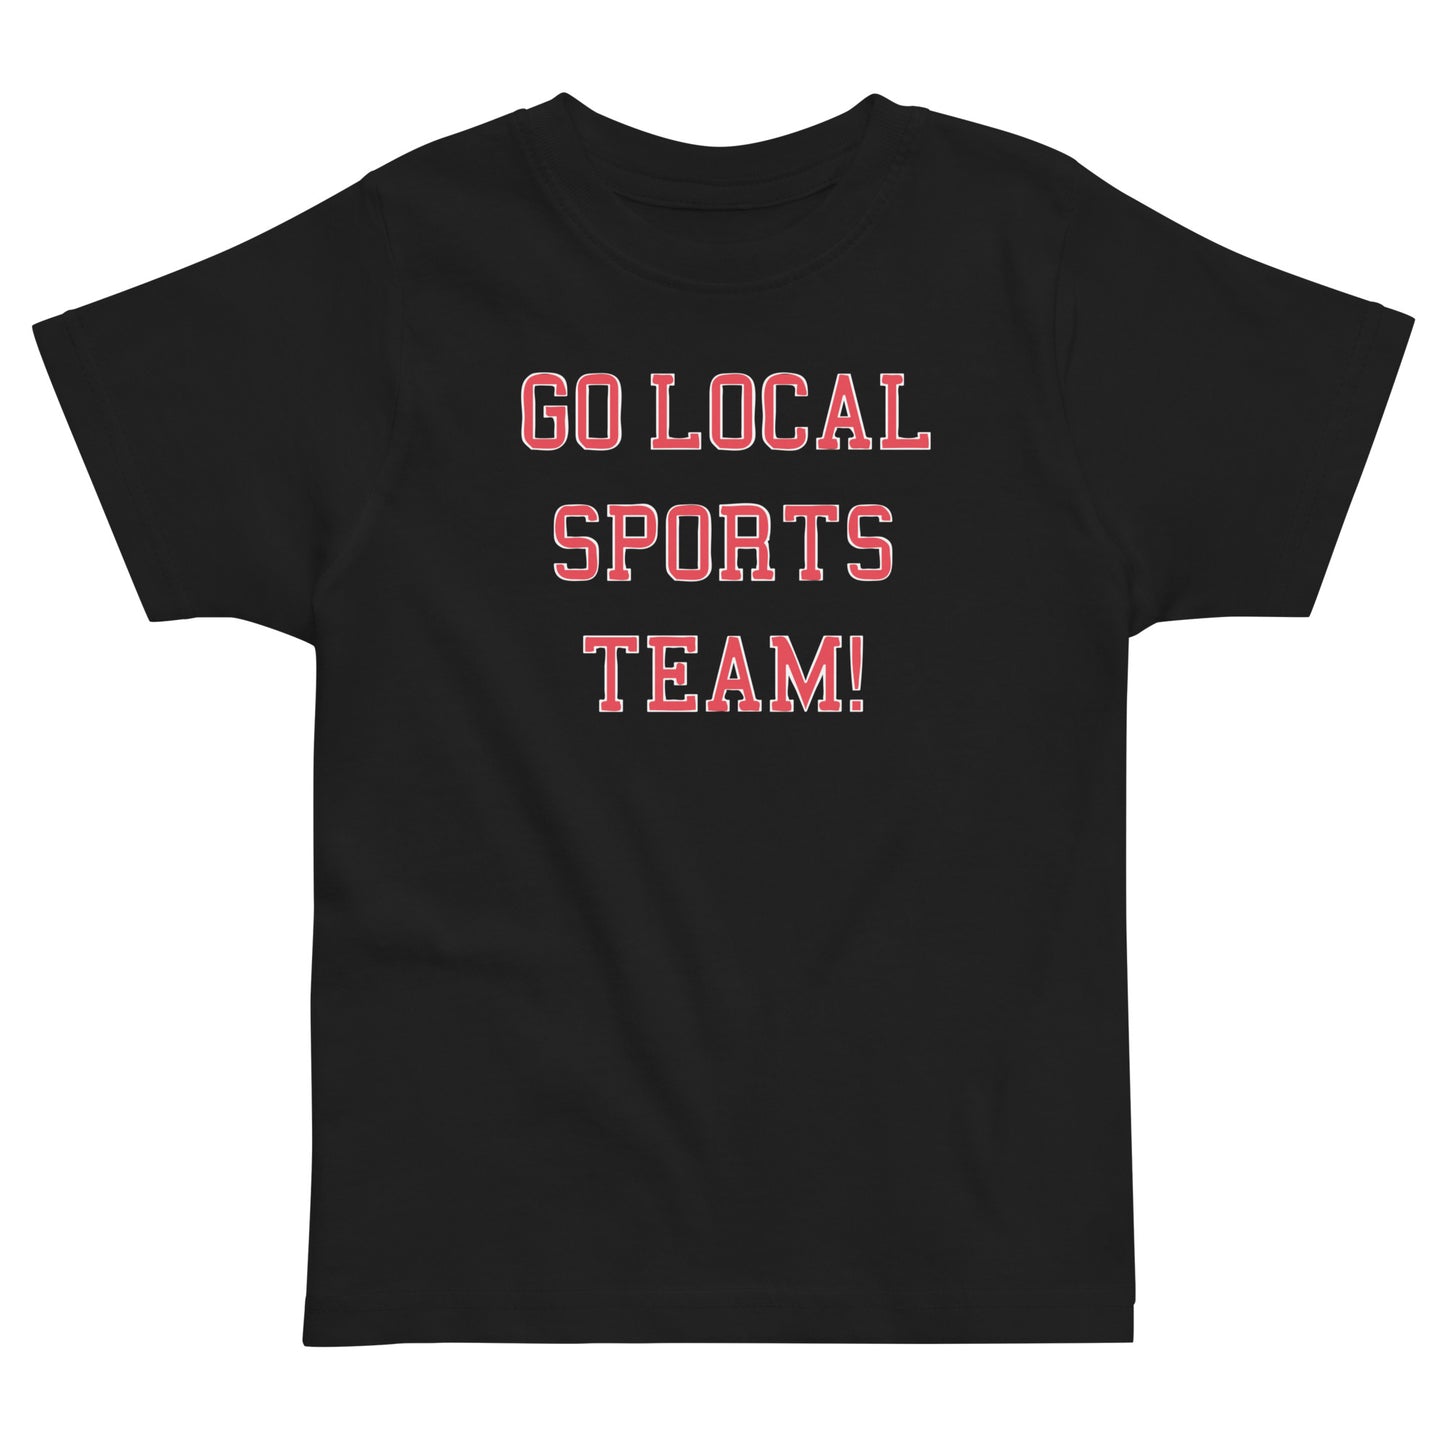 Go Local Sports Team! Kid's Toddler Tee